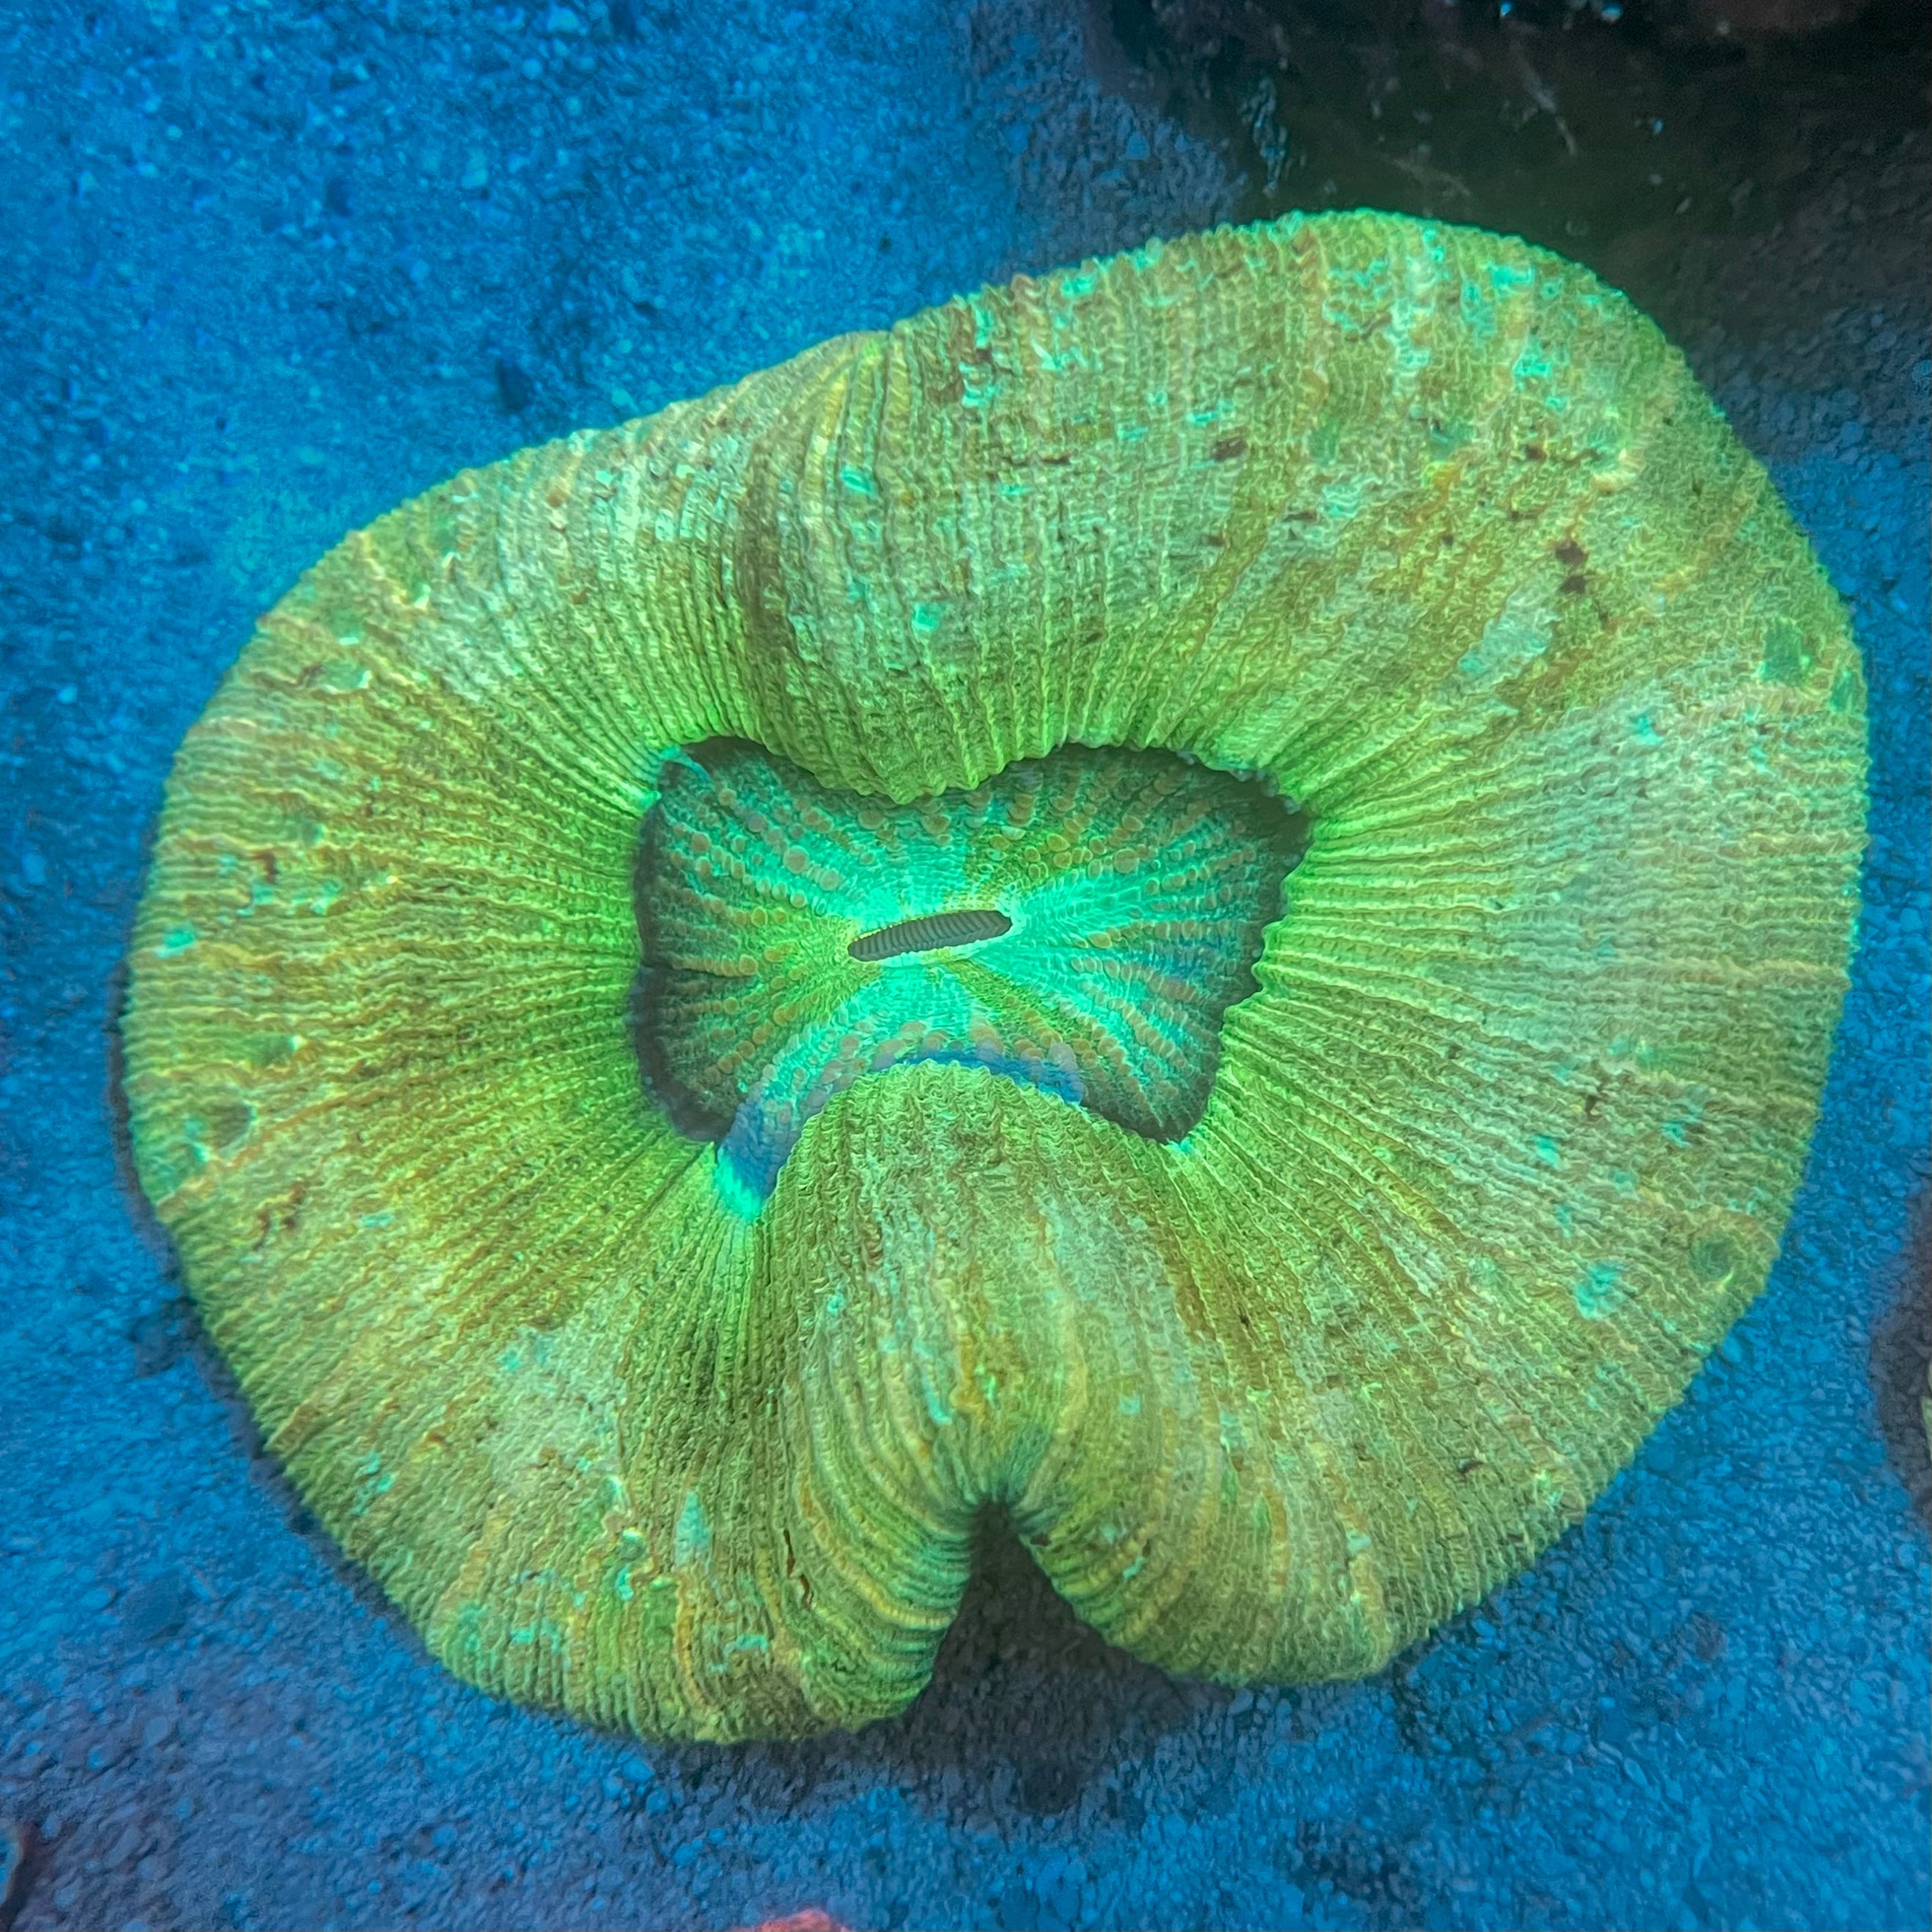 Wellso/Trachy Brain Coral - WYSIWYG Colony Reef Lounge Coral 